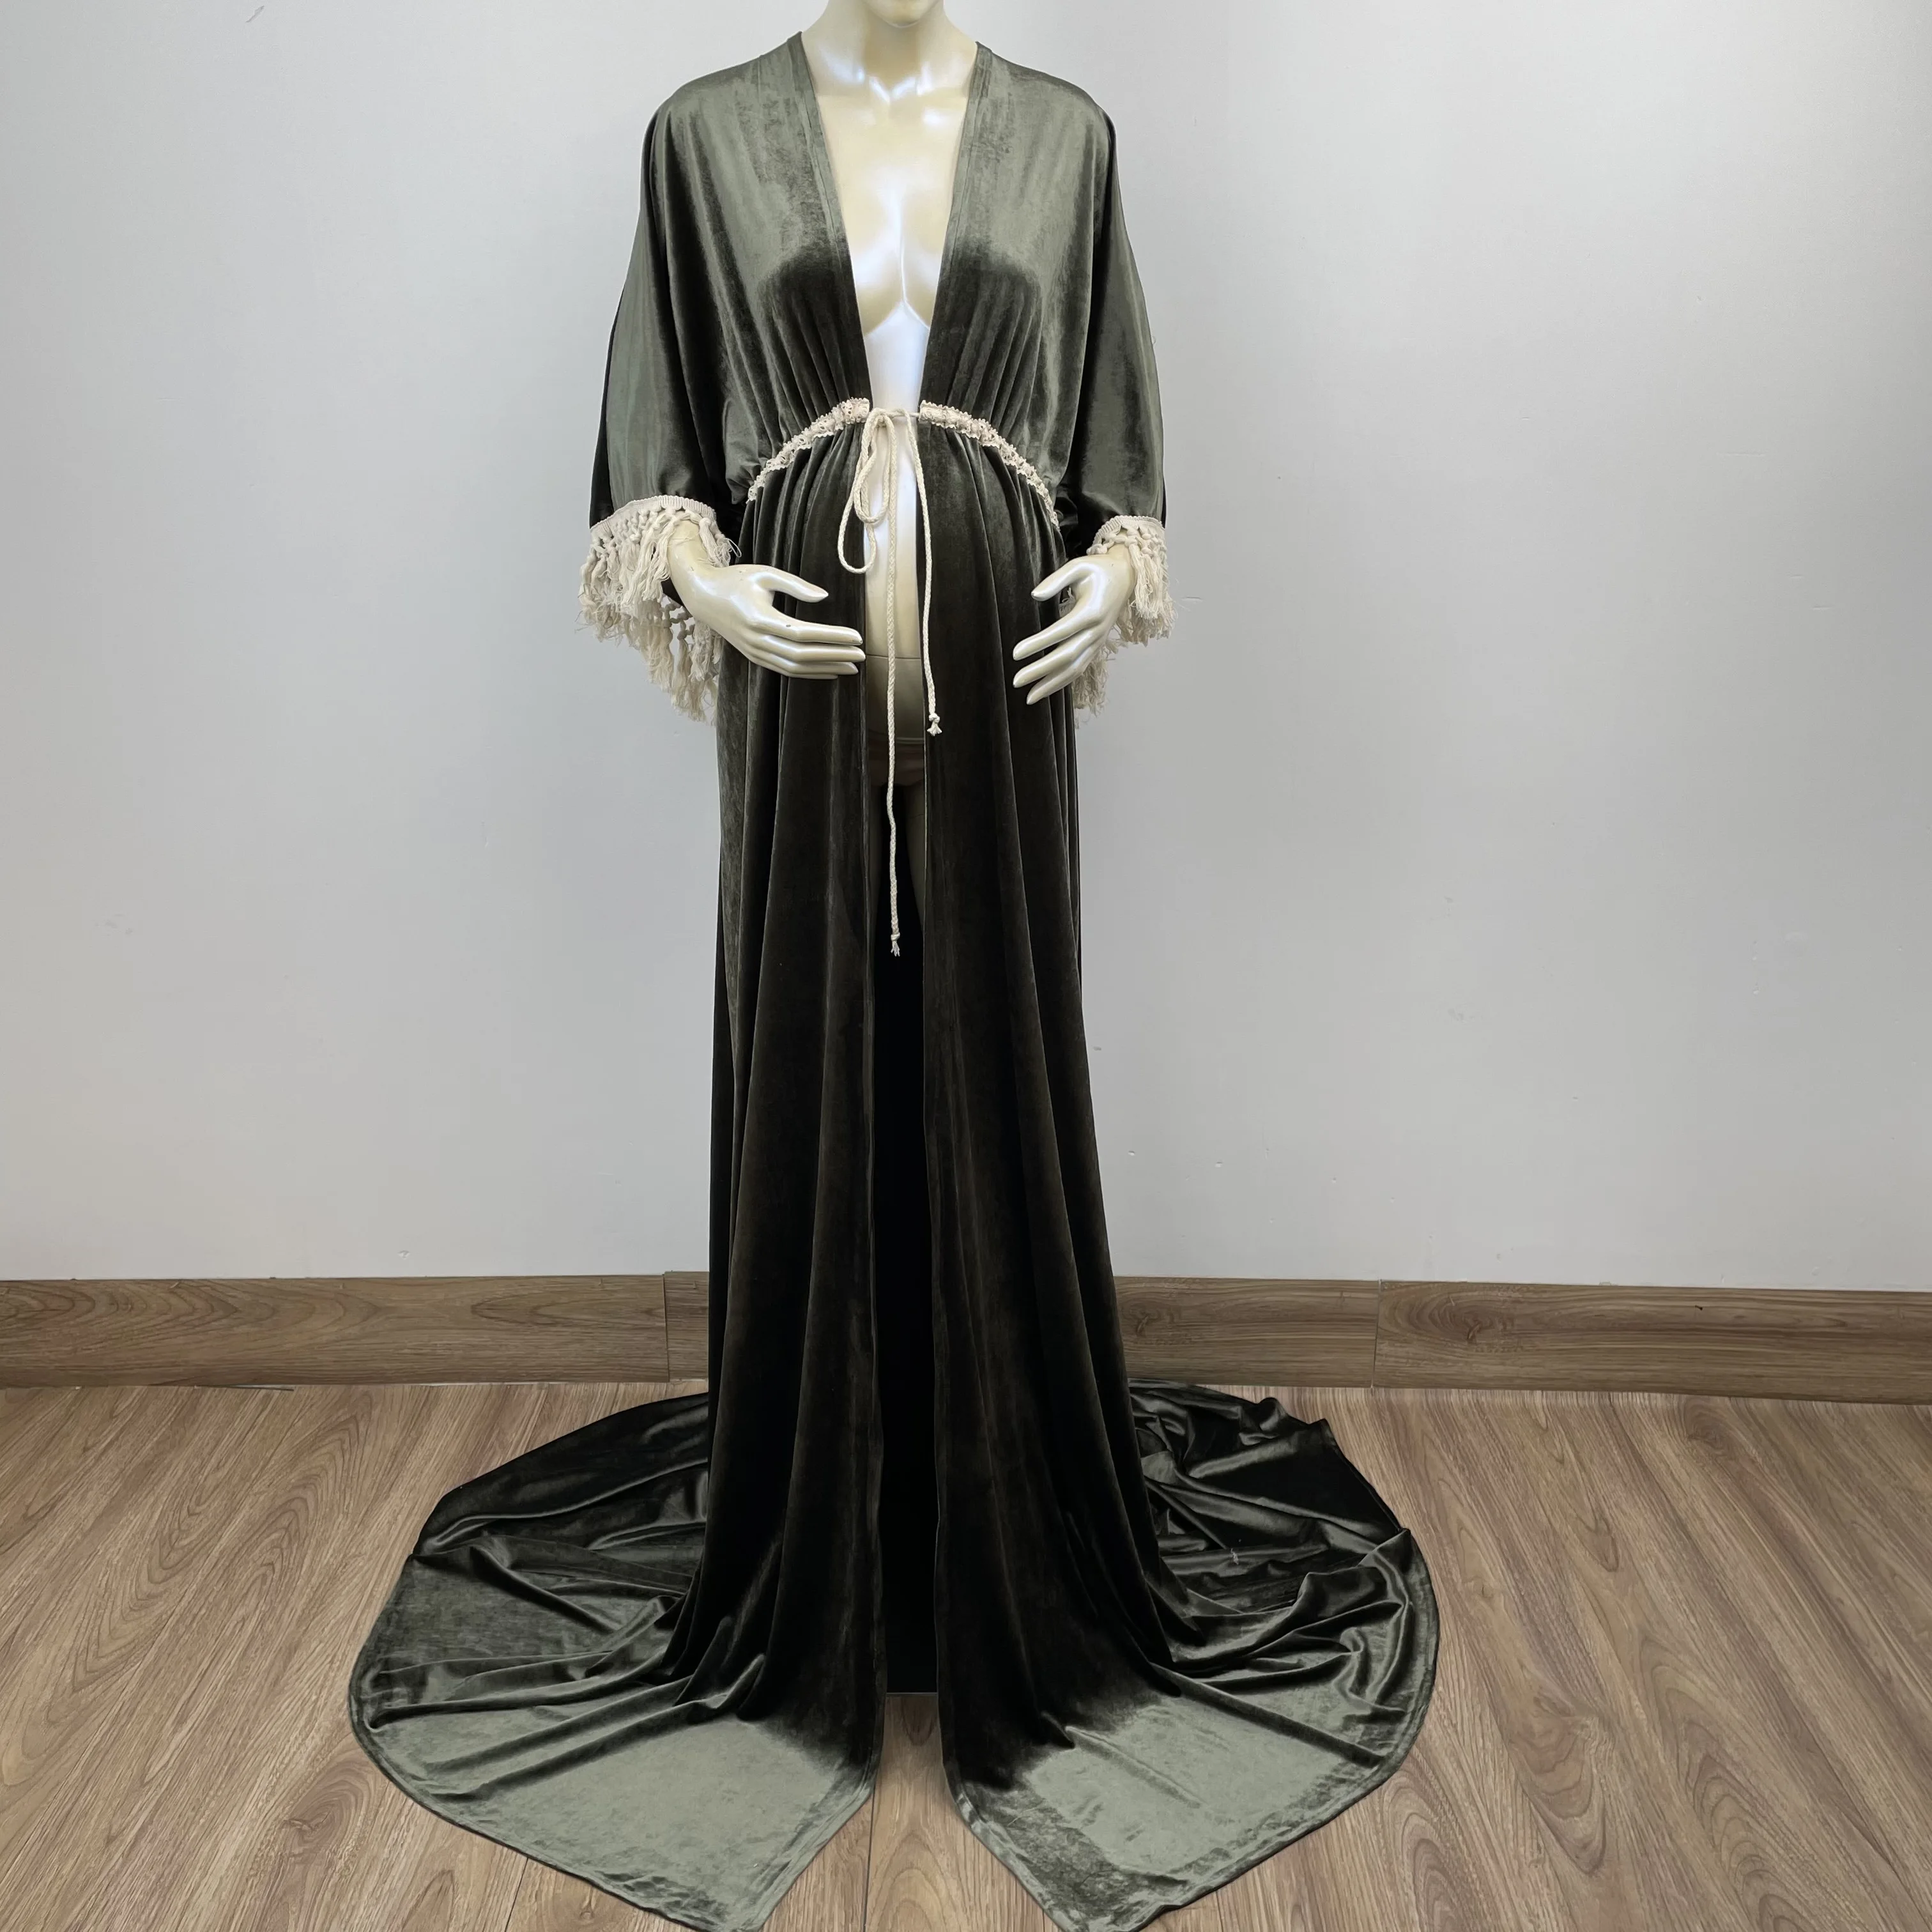 Maxi Half Sleeves Front Split Maternity Dress Photo Shoot Pregnant Velvet Gown for Woman Photography Prop Baby Shower Robe